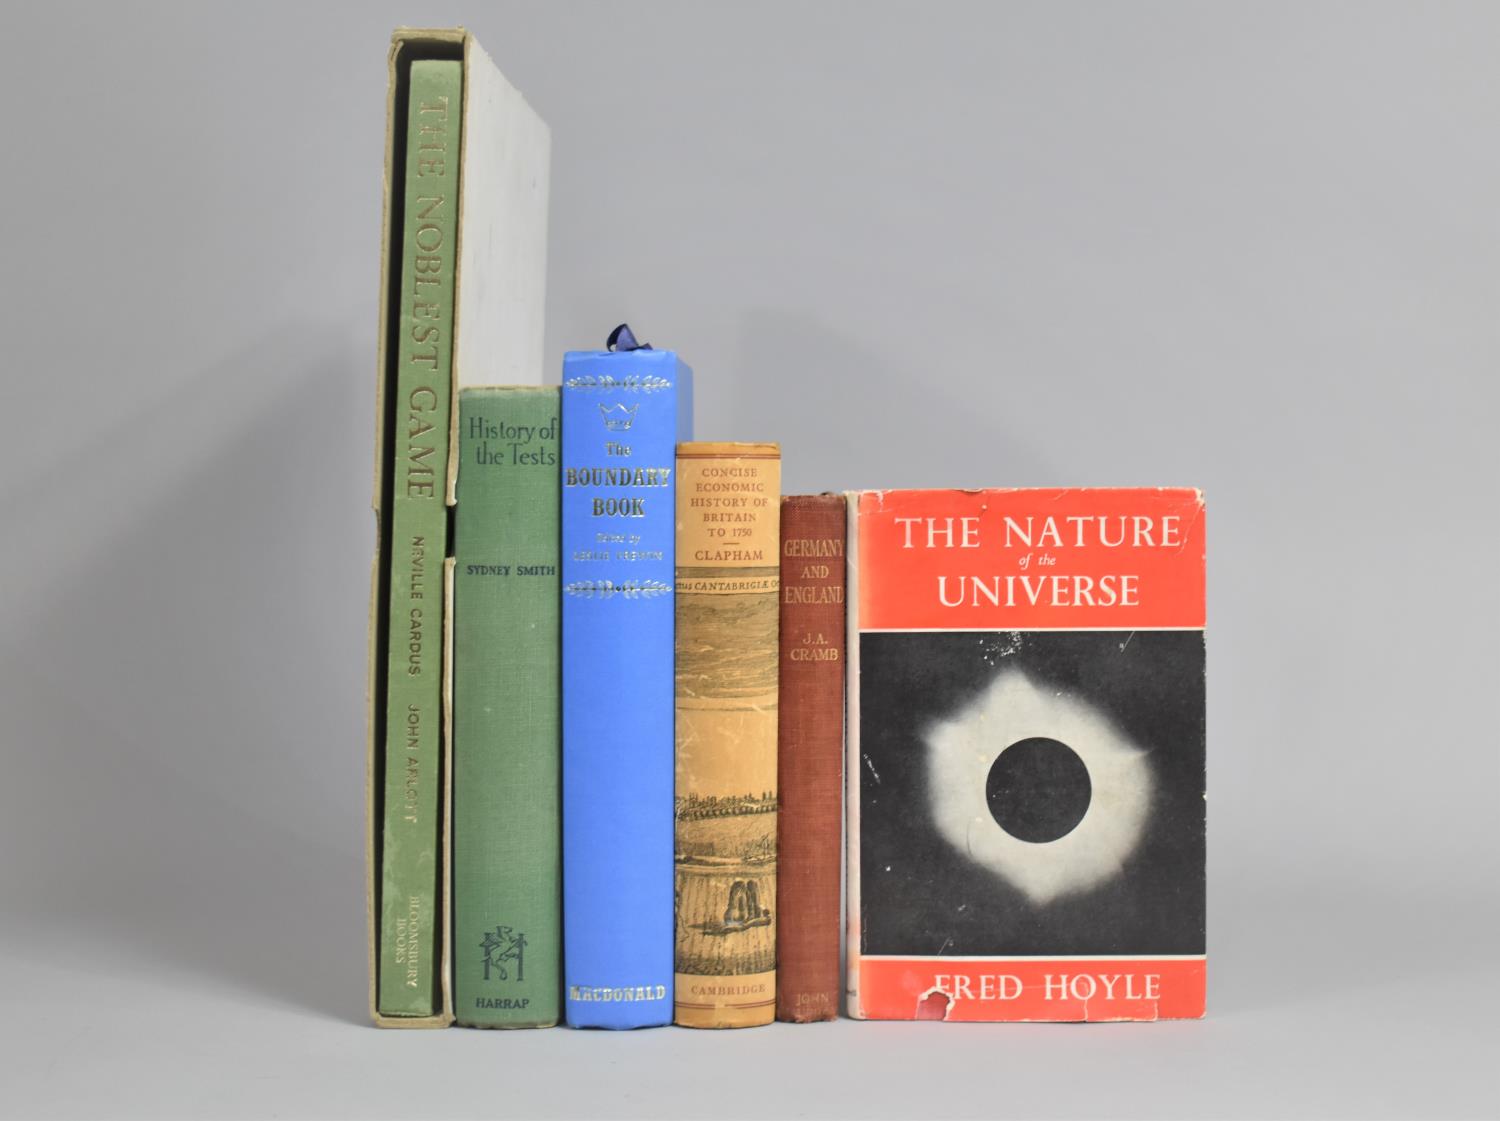 A Collection of Vintage Books to Include the Nature of the Universe by Fred Hoyle, Germany and